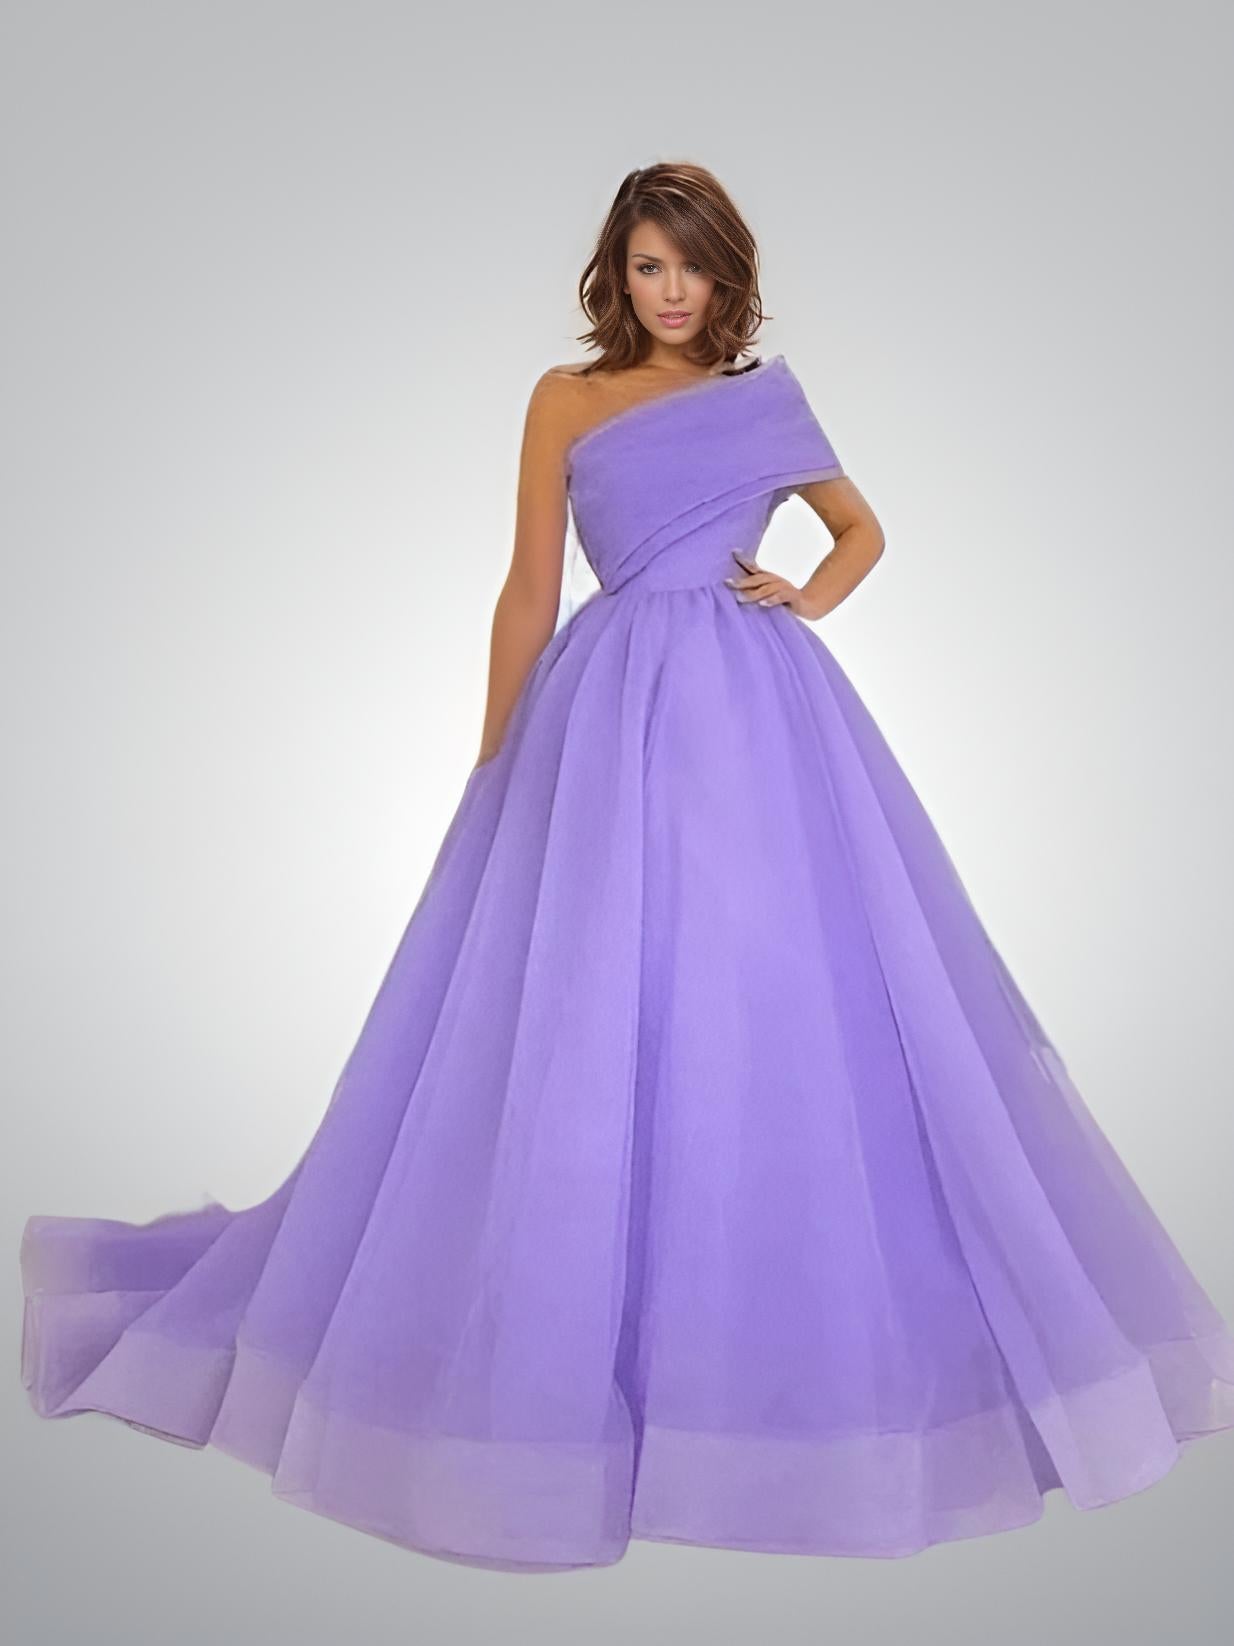 Woman posing in Lavender Purple Alice One Shoulder Evening Gown